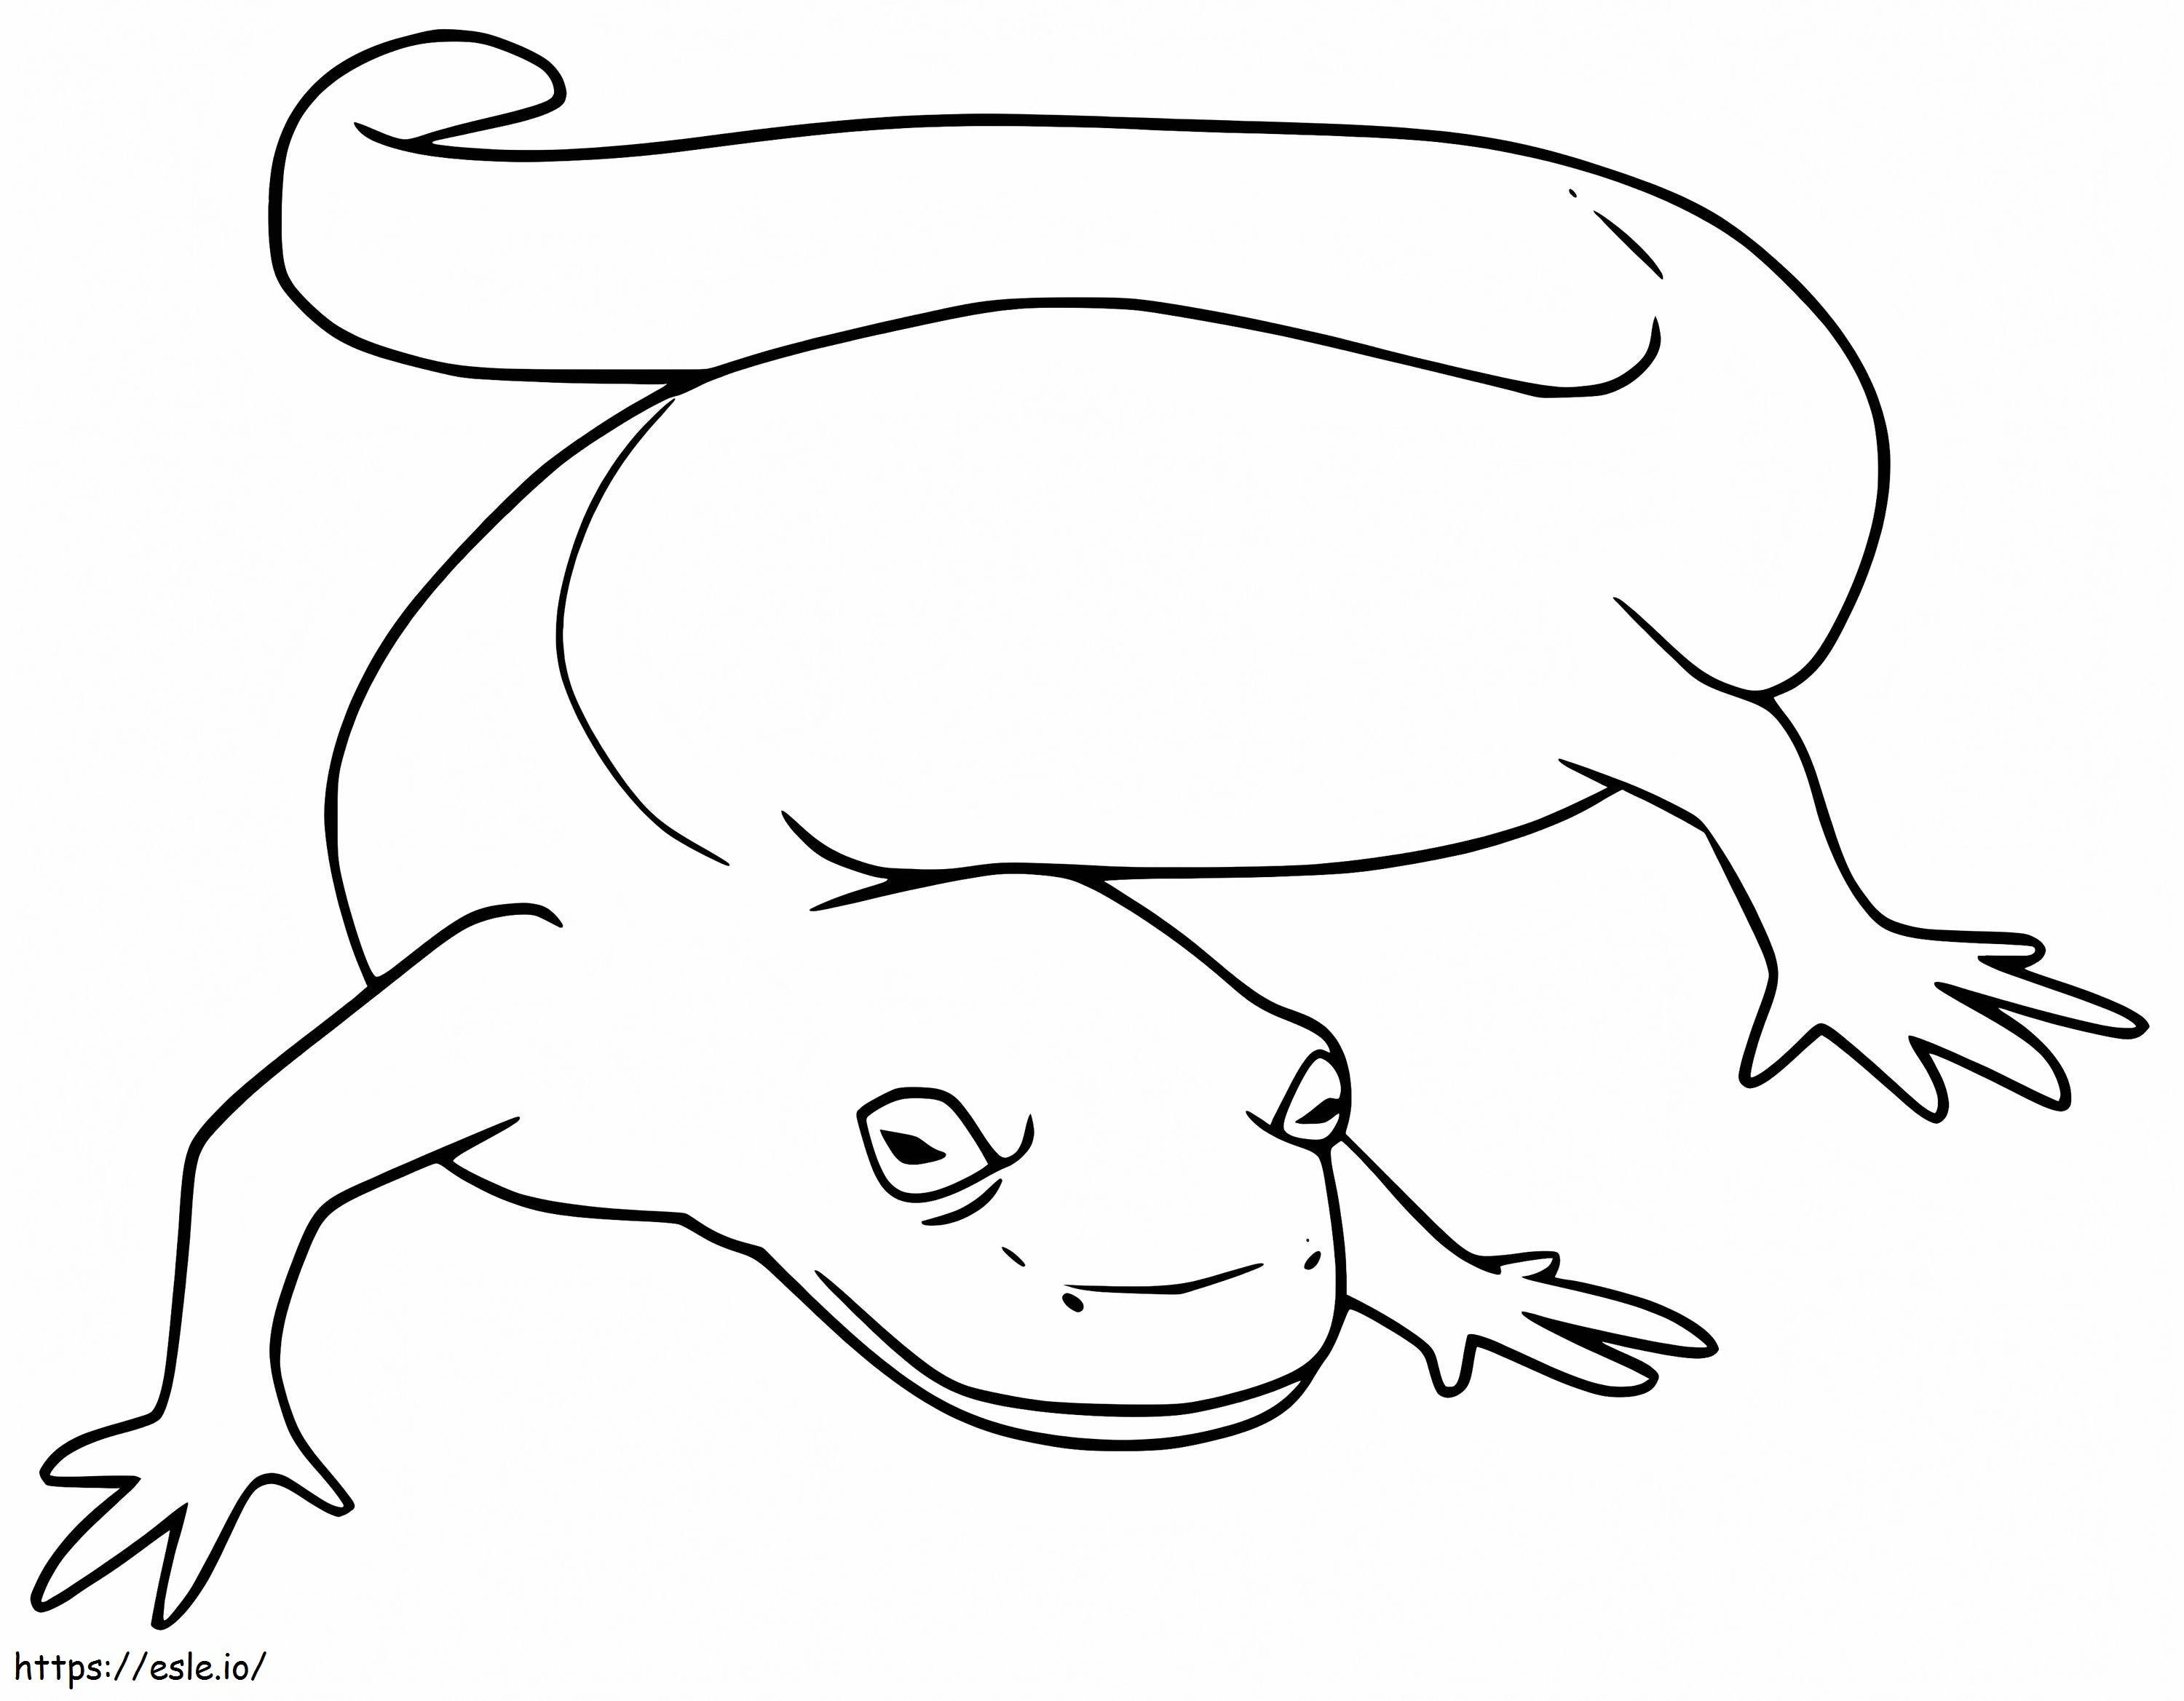 Simple Newt coloring page